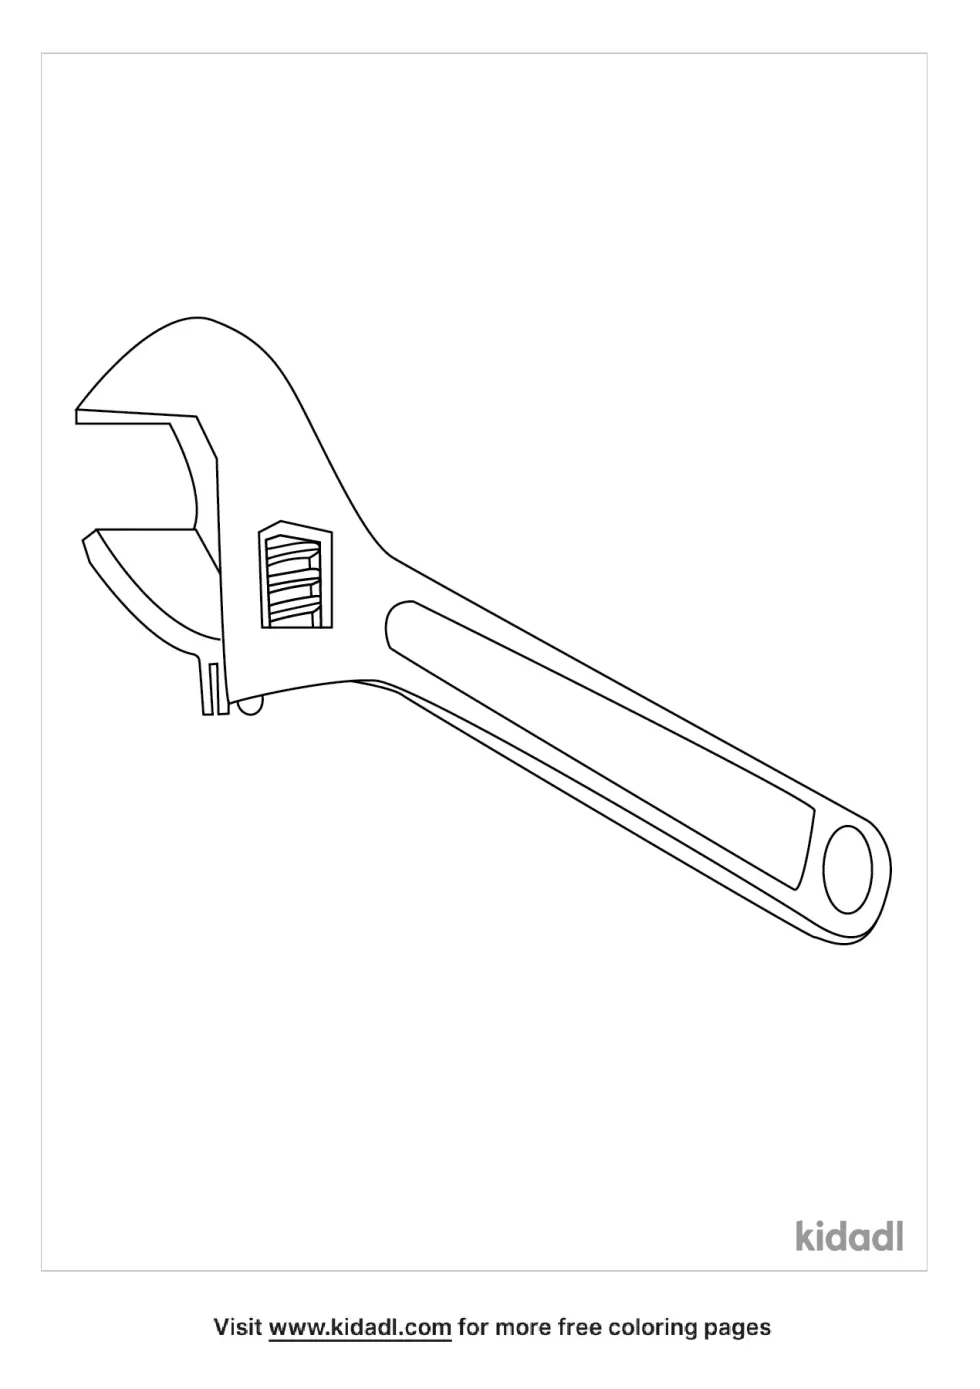 Wrench Coloring Page